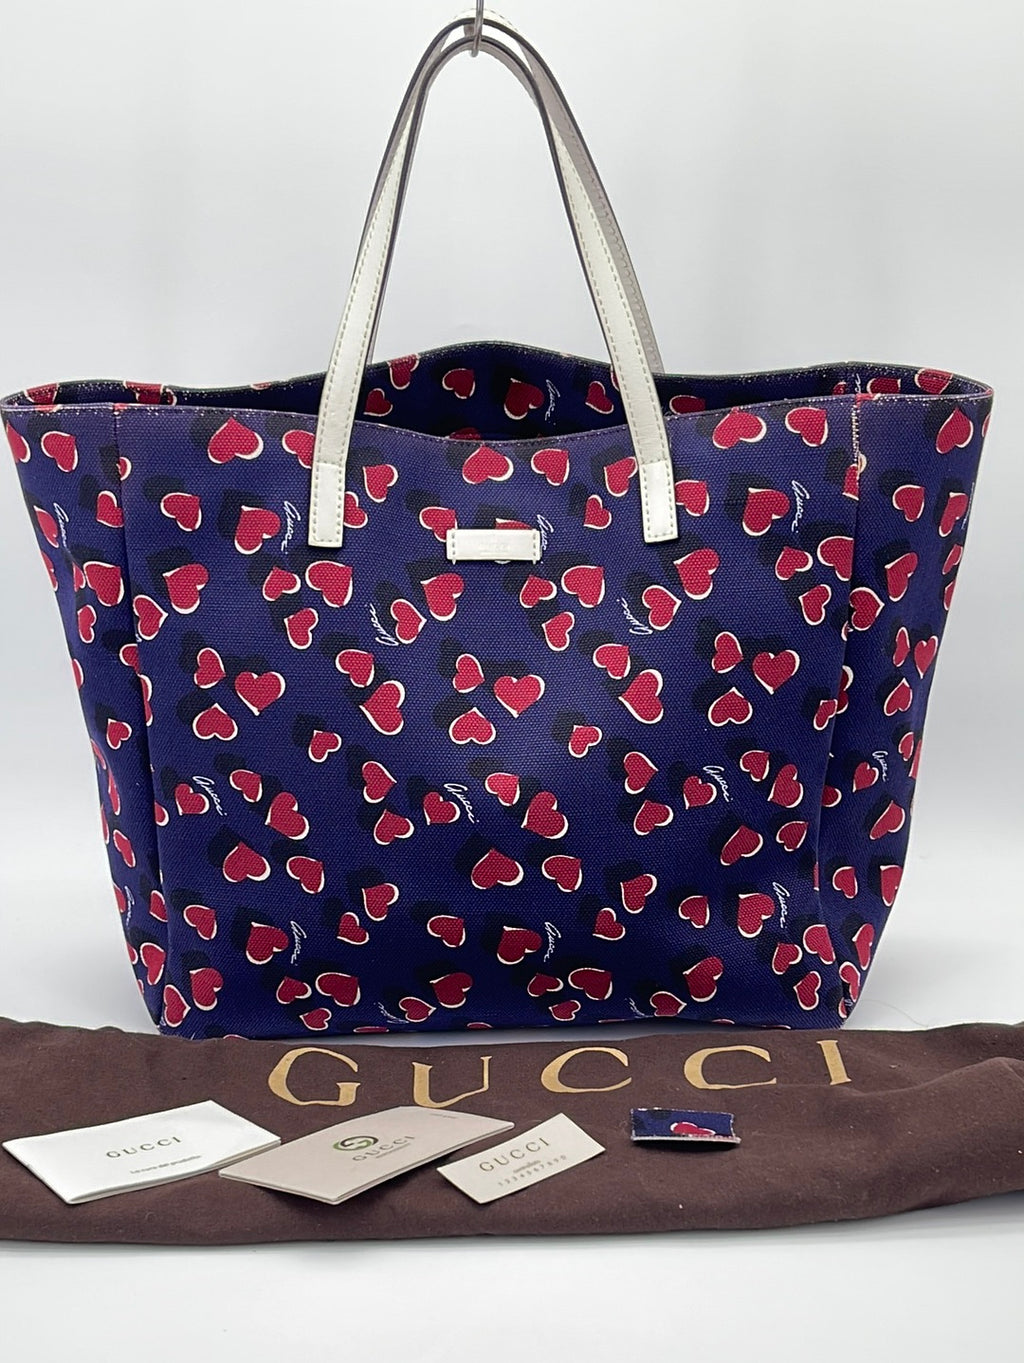 Preloved GUCCI Blue Canvas with Hearts Tote 282439502752 080923